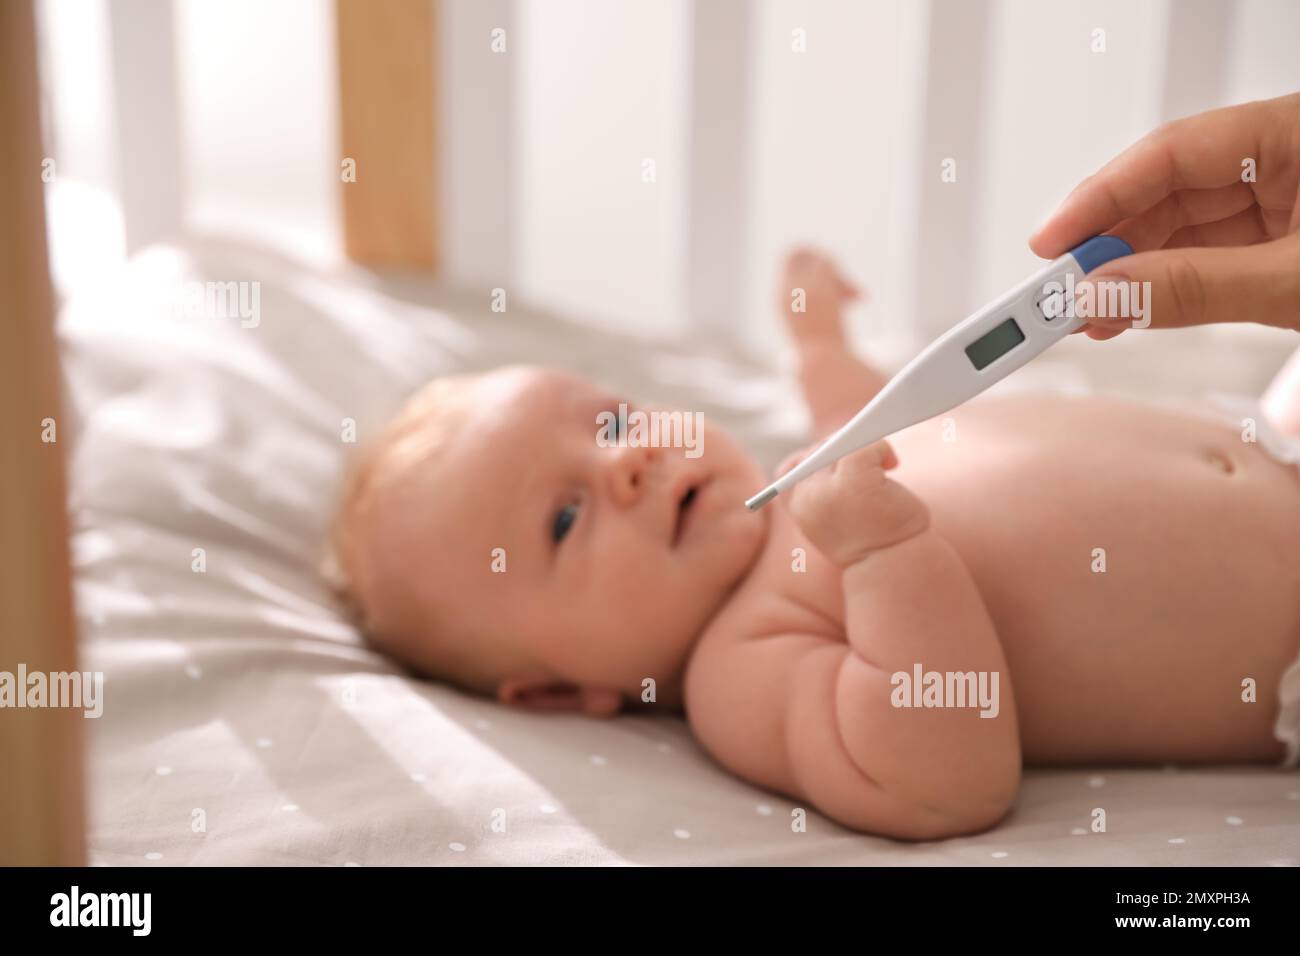 https://c8.alamy.com/comp/2MXPH3A/cute-baby-lying-in-crib-focus-on-woman-holding-digital-thermometer-health-care-2MXPH3A.jpg